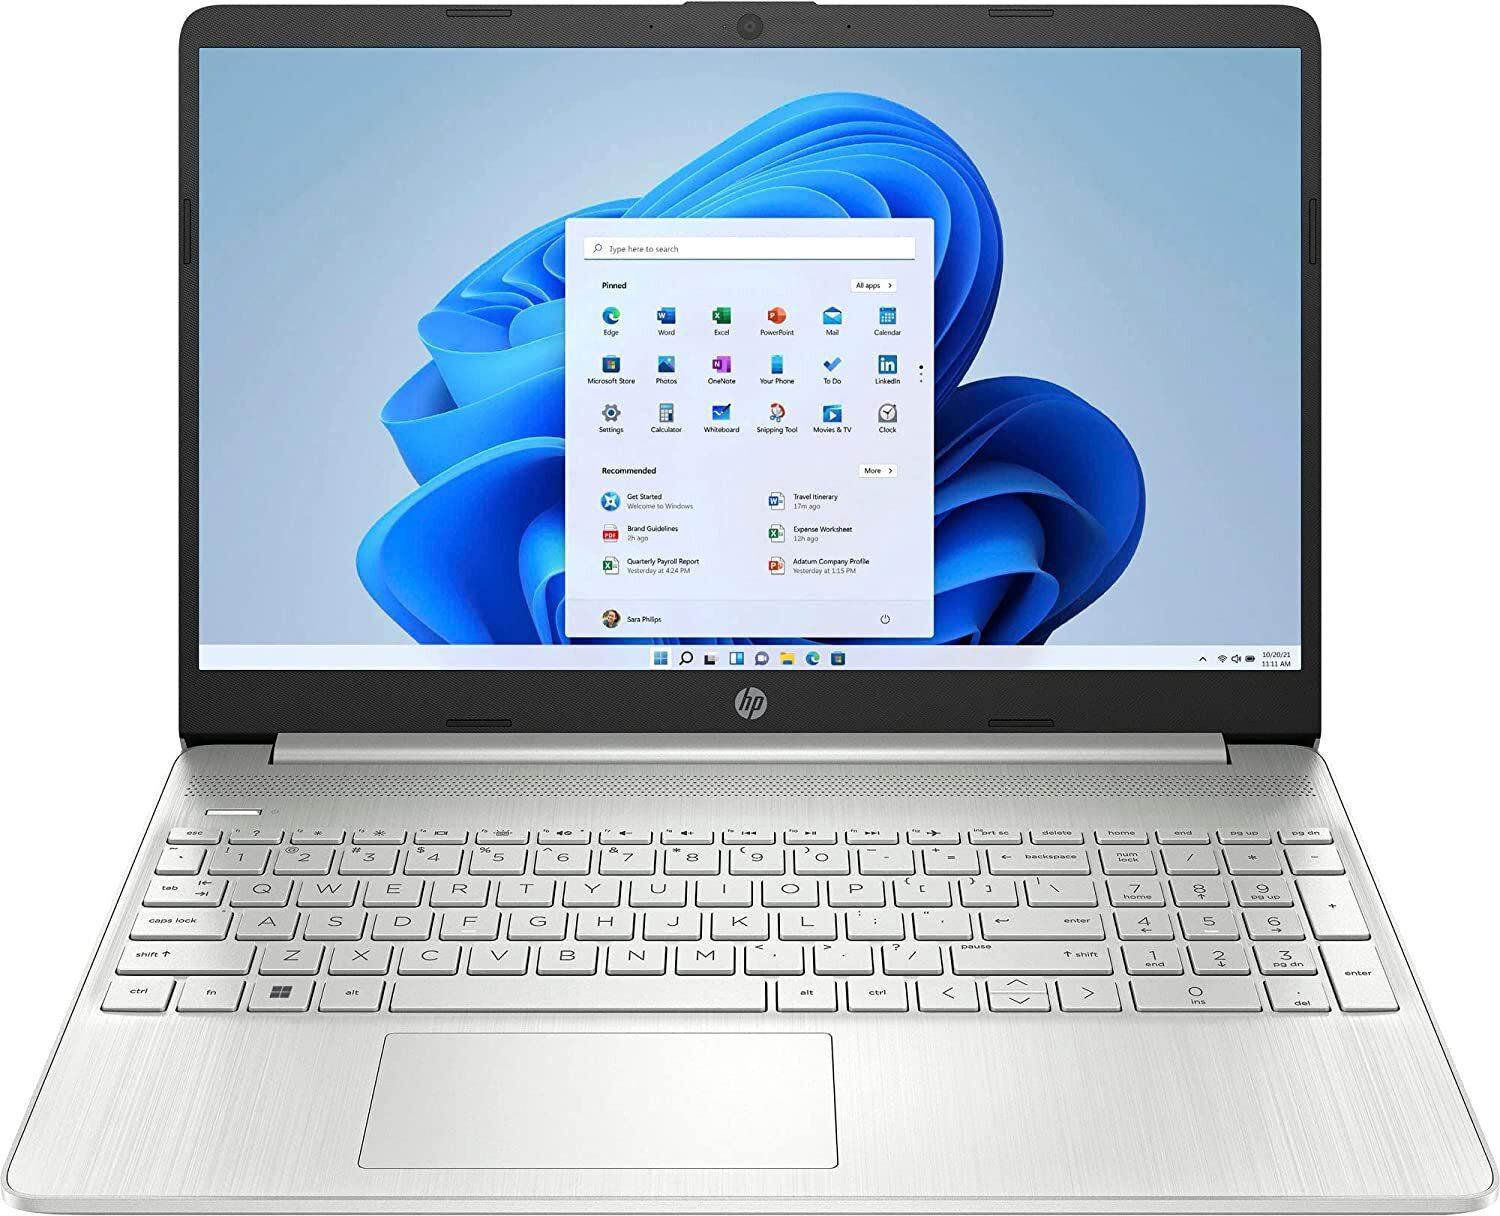 HP 15 DY 2703dx, Intel Core i5-1135G7, 8GB &lrm;DDR4 RAM, 512GB SSD, 15.6&quot; HD LED Touch Window 11 - Natural Silver